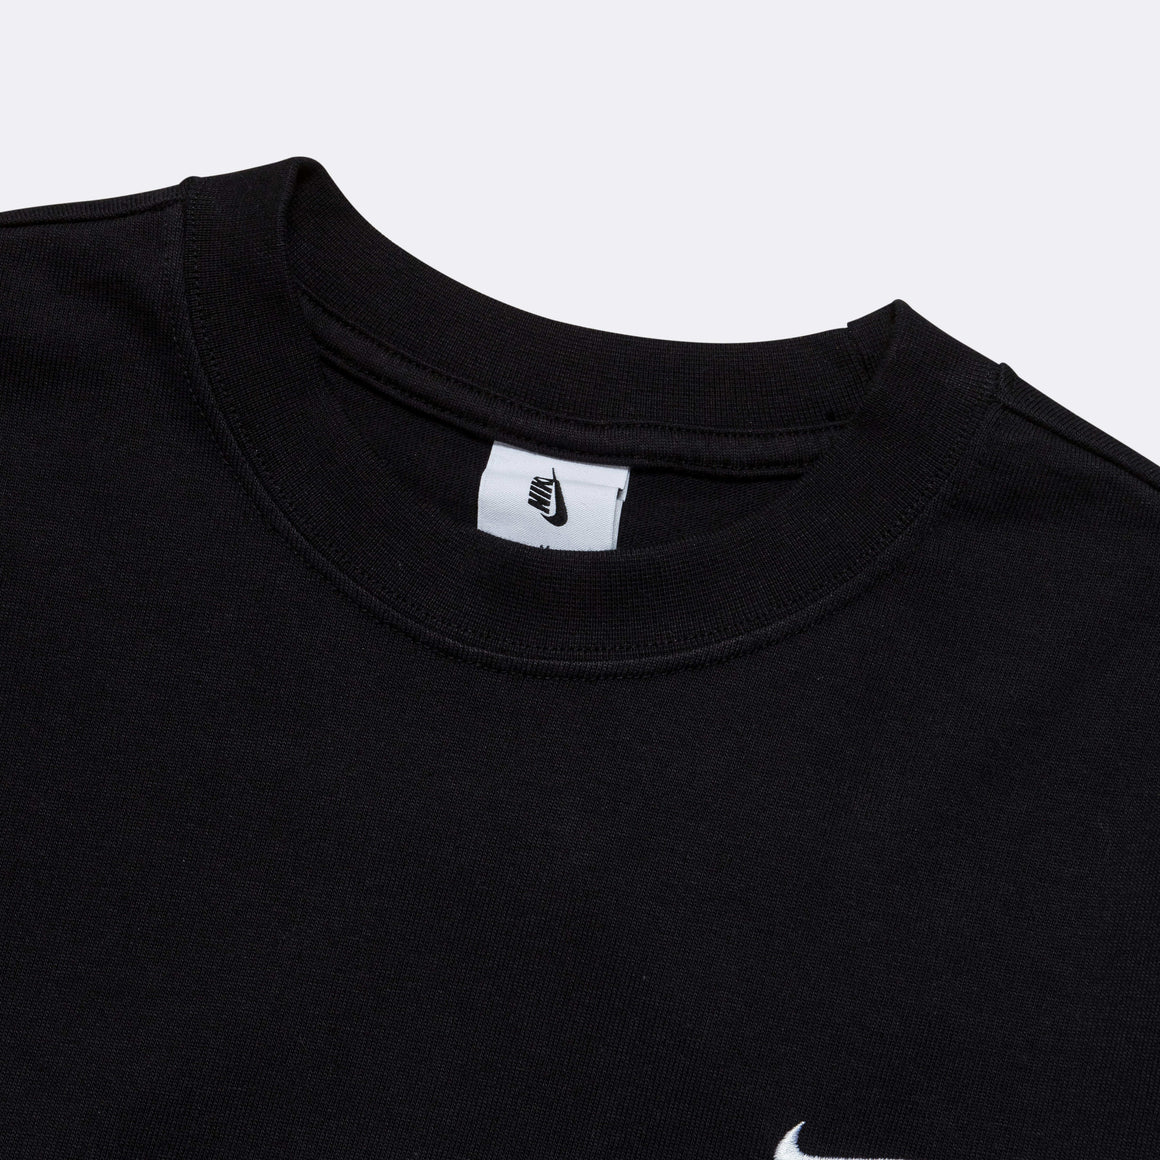 Nike - NikeLab Solo Swoosh LS Top - Black/White - UP THERE